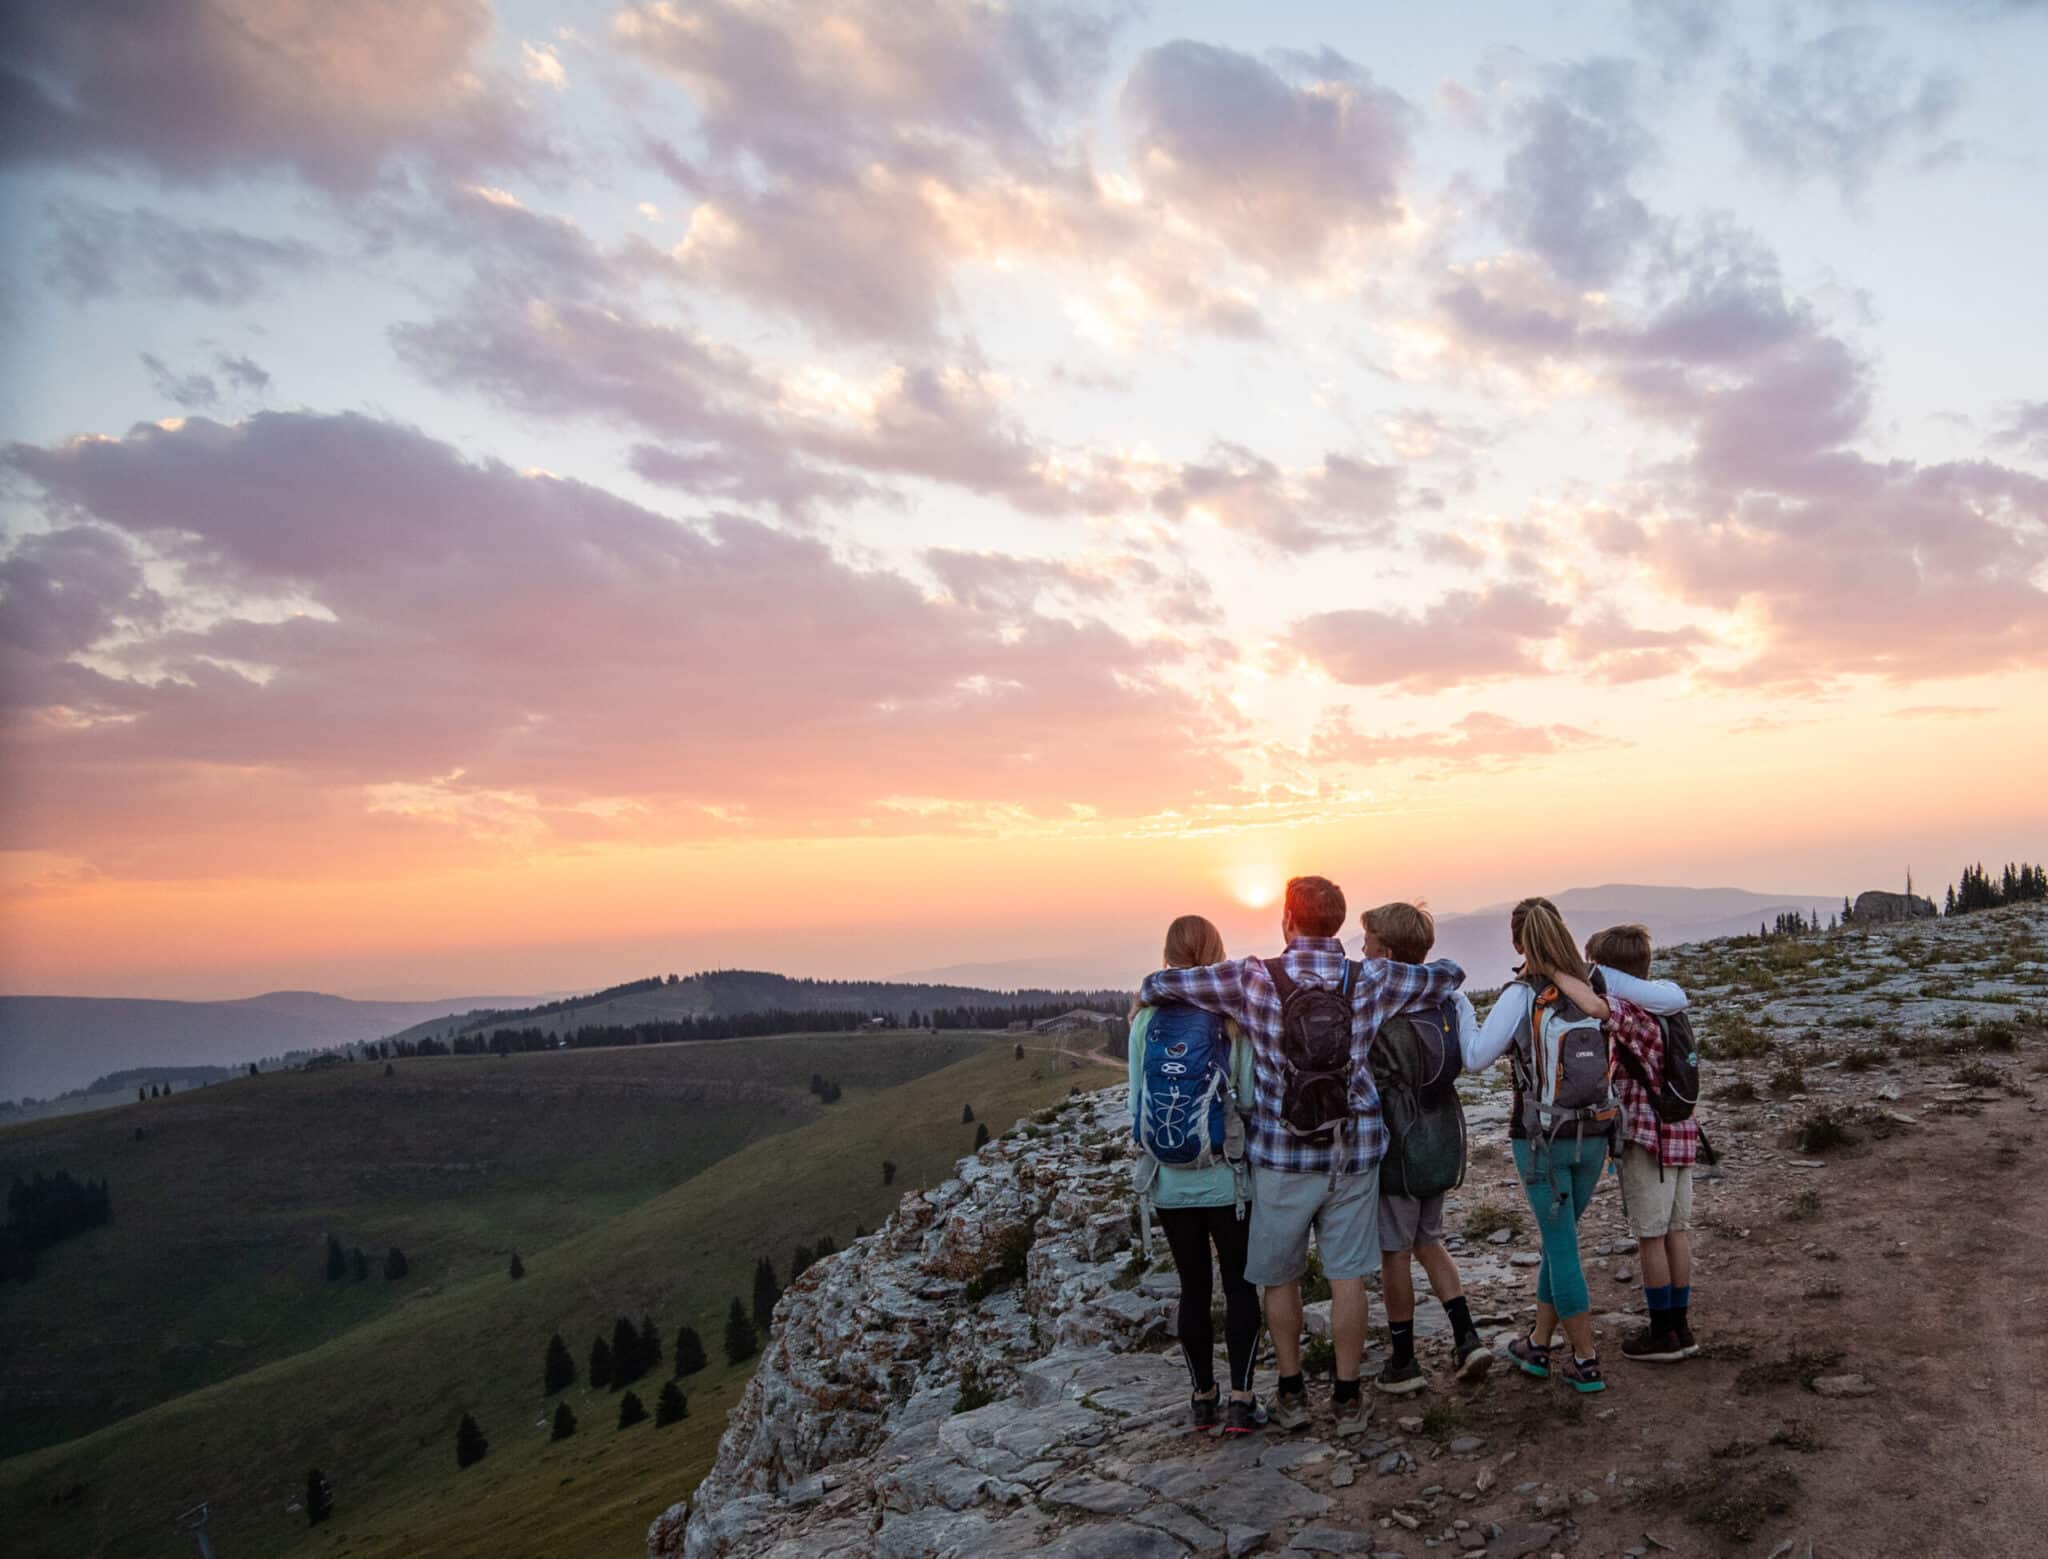 A family of five stands close together with their arms around each other as they watch a blazing sunset on a rocky outcropping in Vail, Colorado.